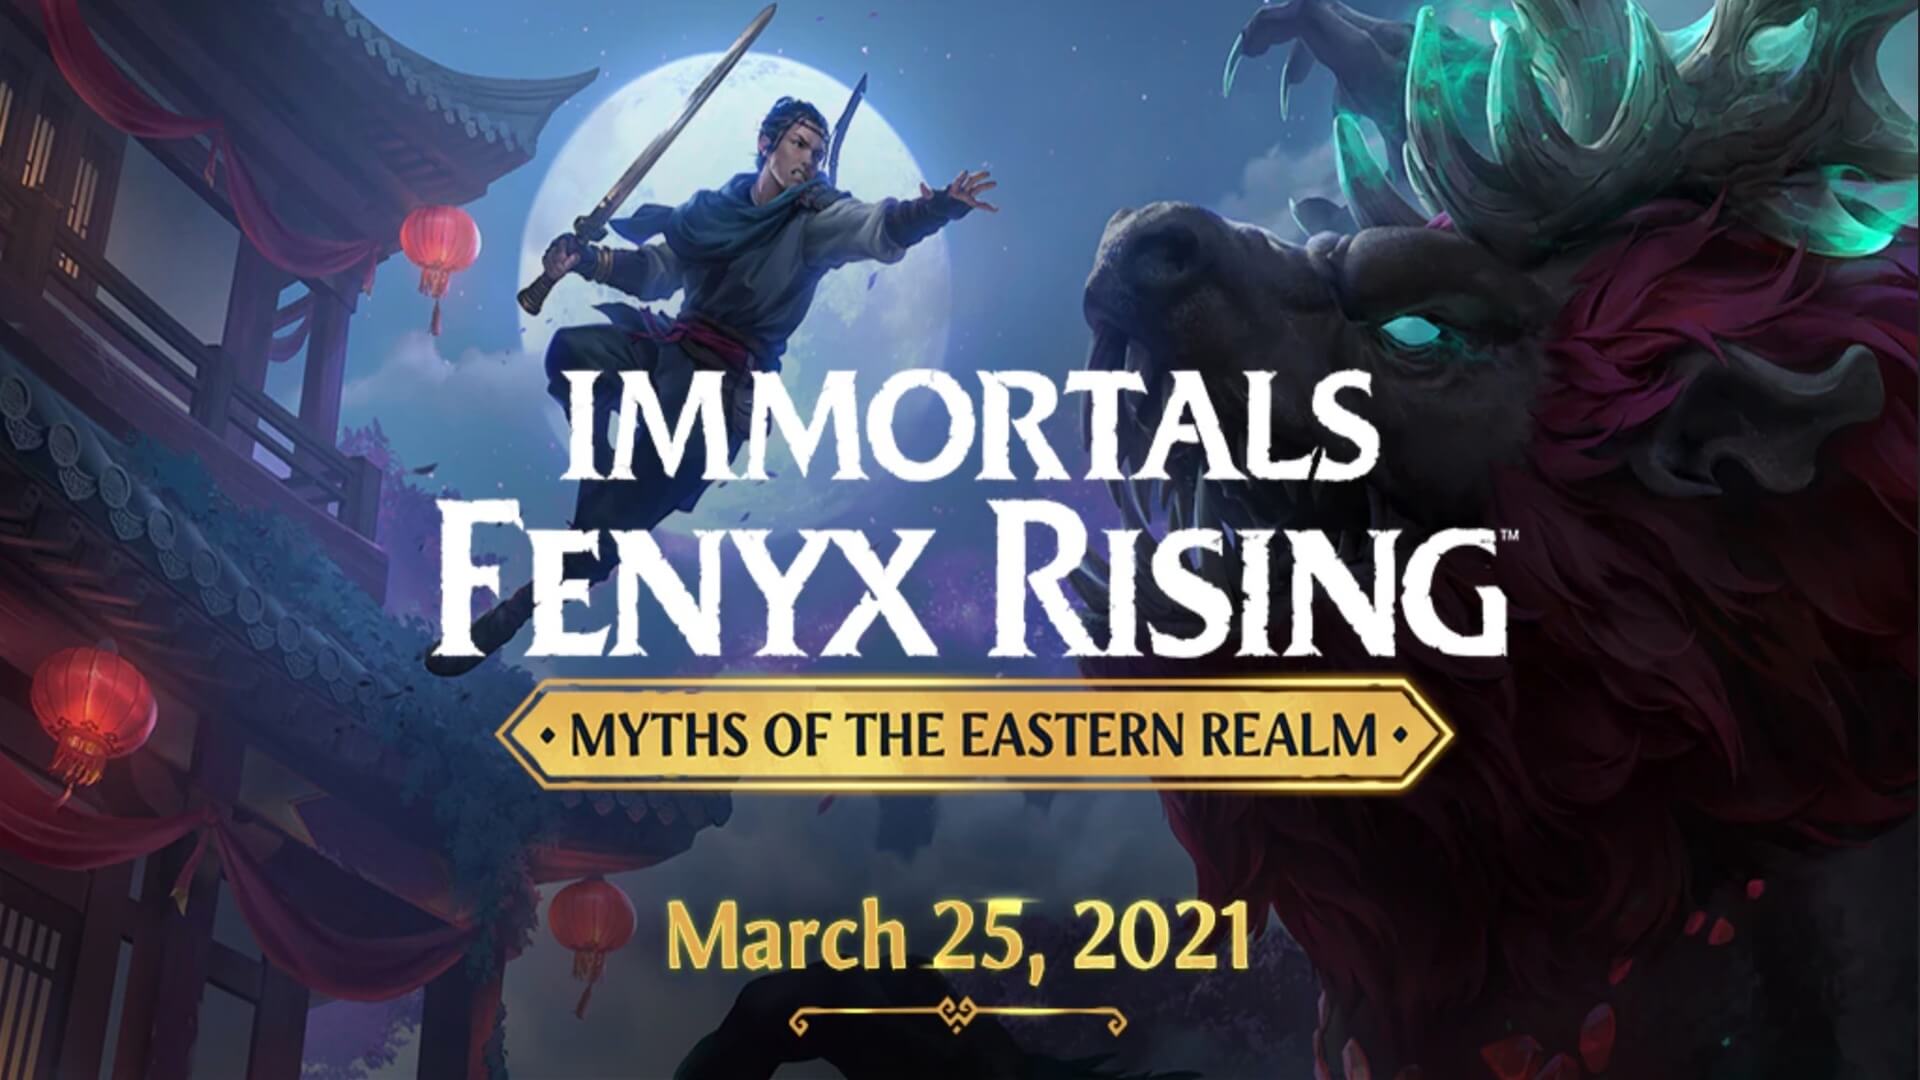 Immortals Fenyx Rising Myths of the Eastern Realm